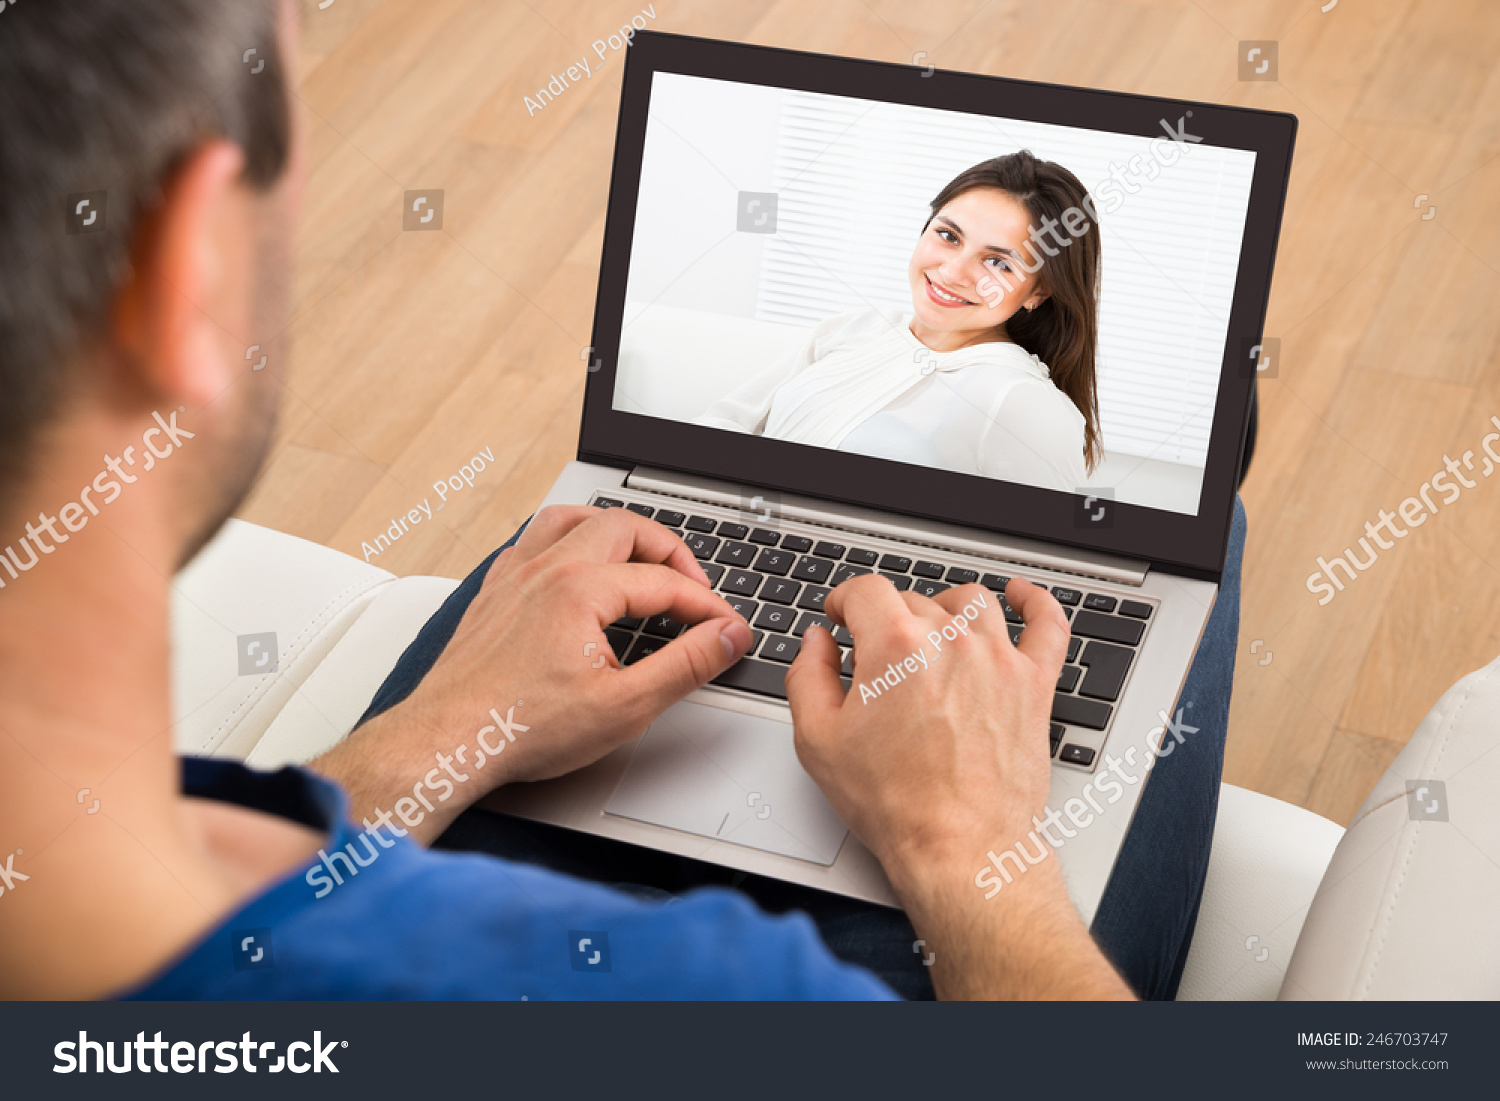 Man Having A Videochat With Woman On Laptop #246703747